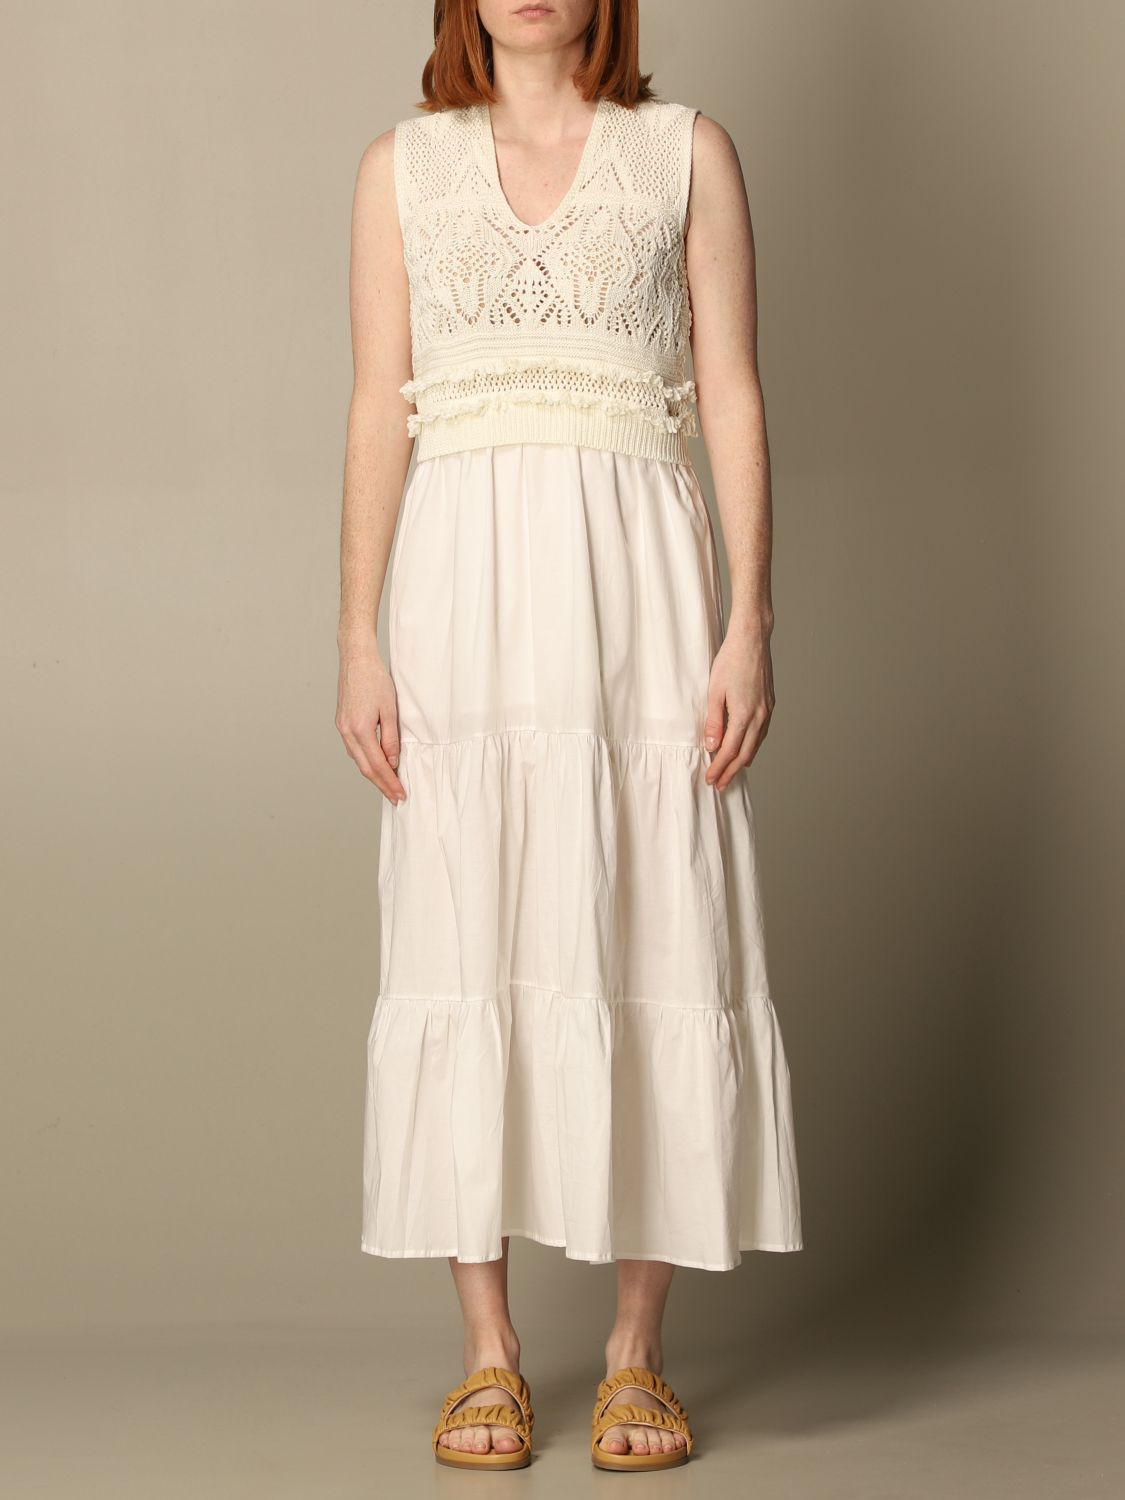 TWINSET: Twin-set long dress in knit and cotton - White | Twinset dress